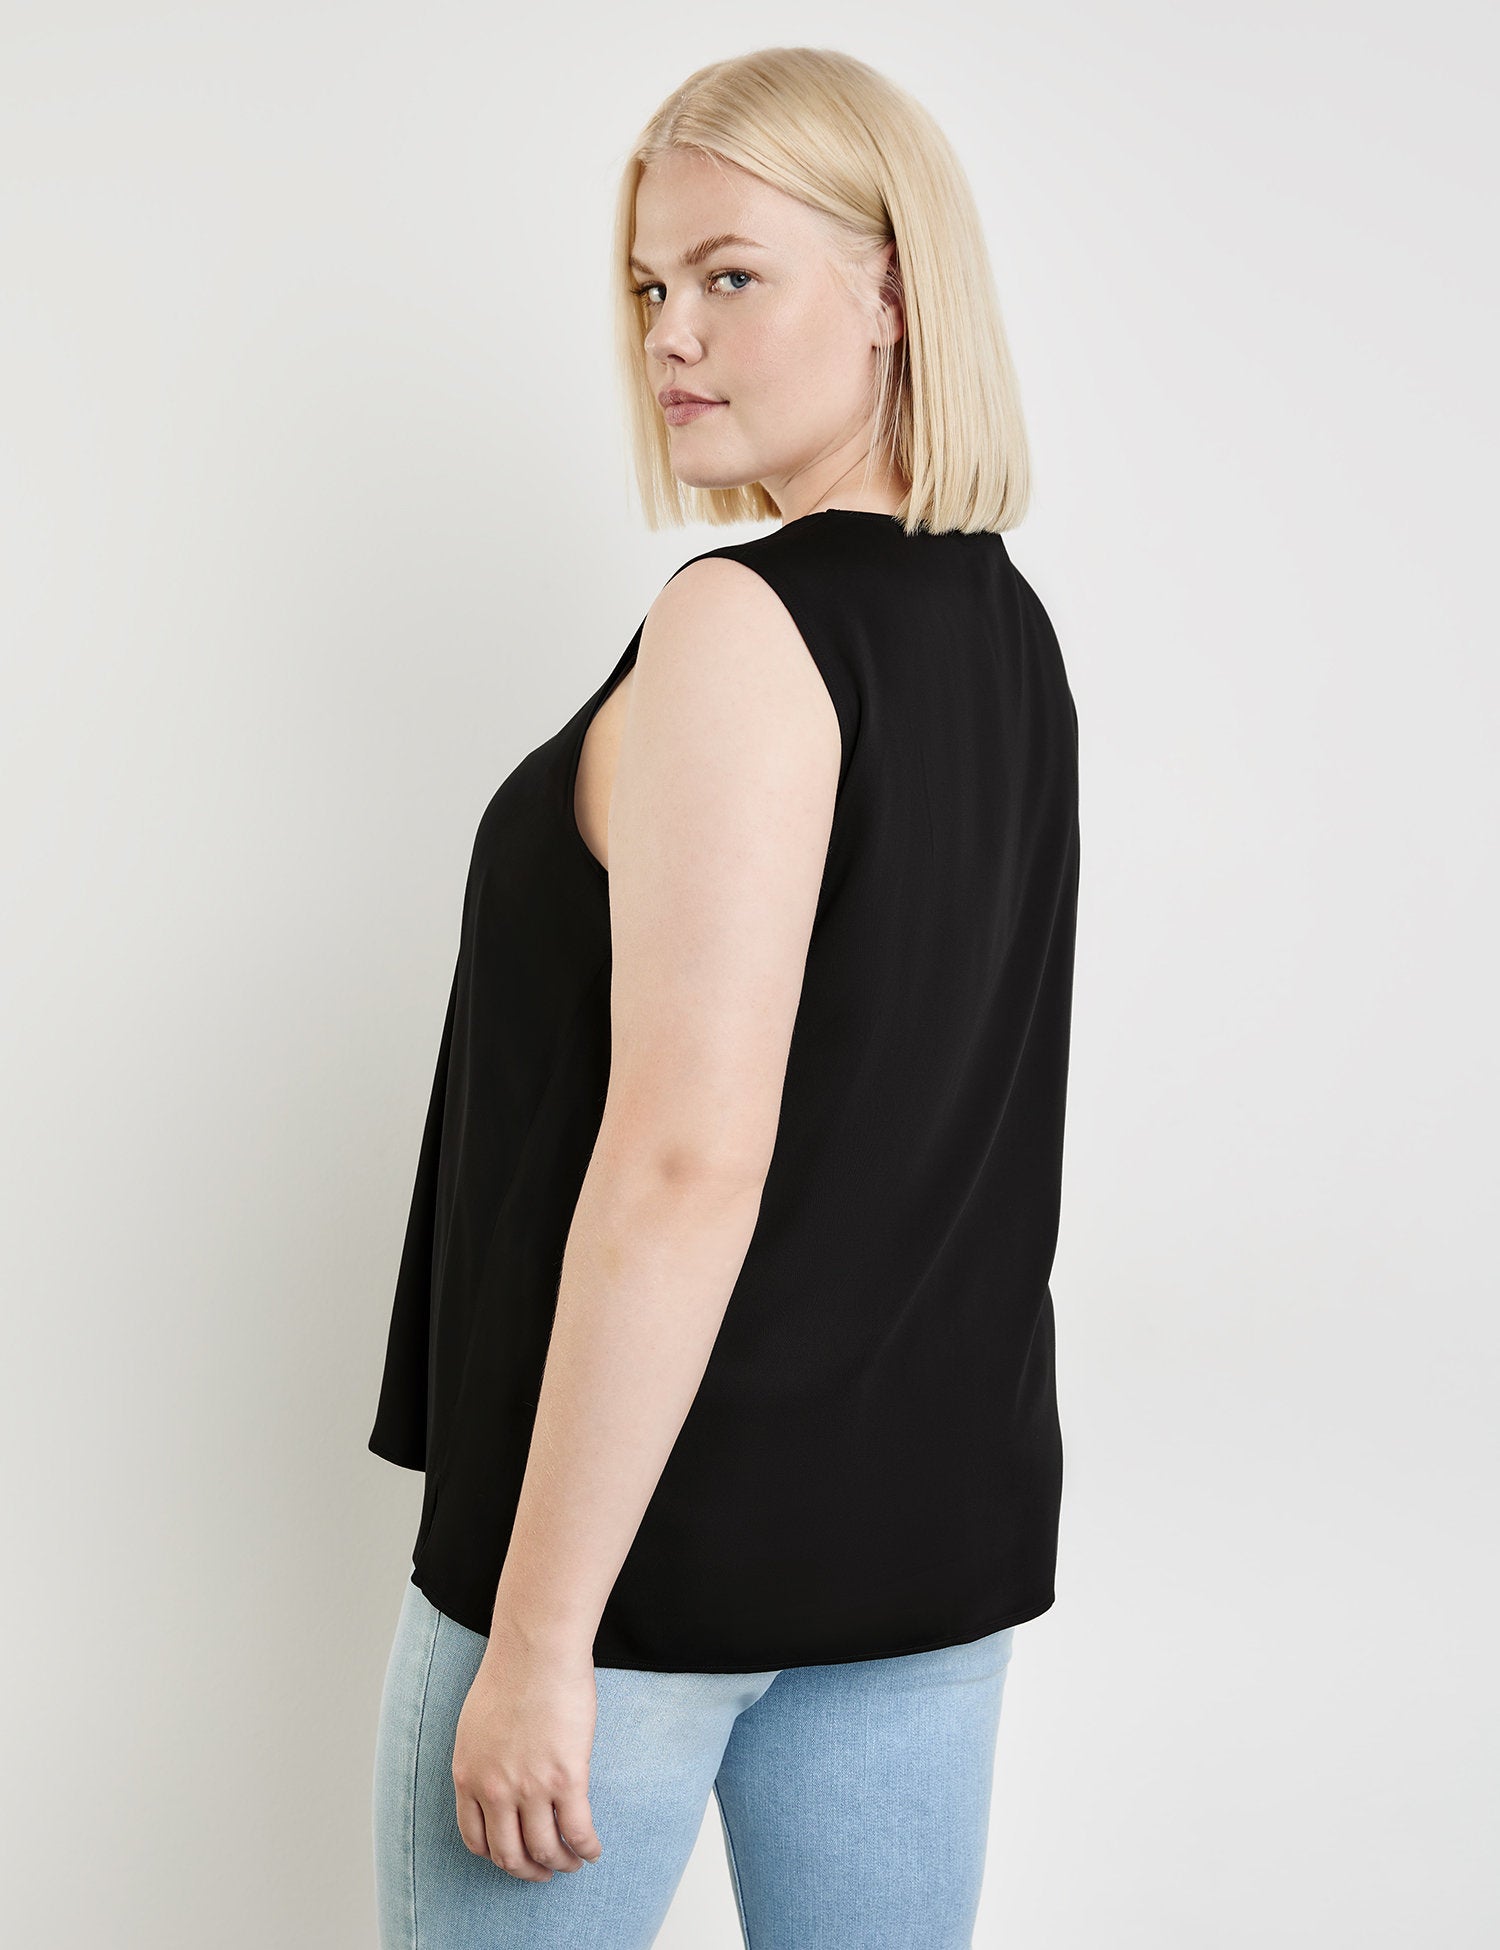 Blouse Top With Side Slits_960994-29141_1100_06